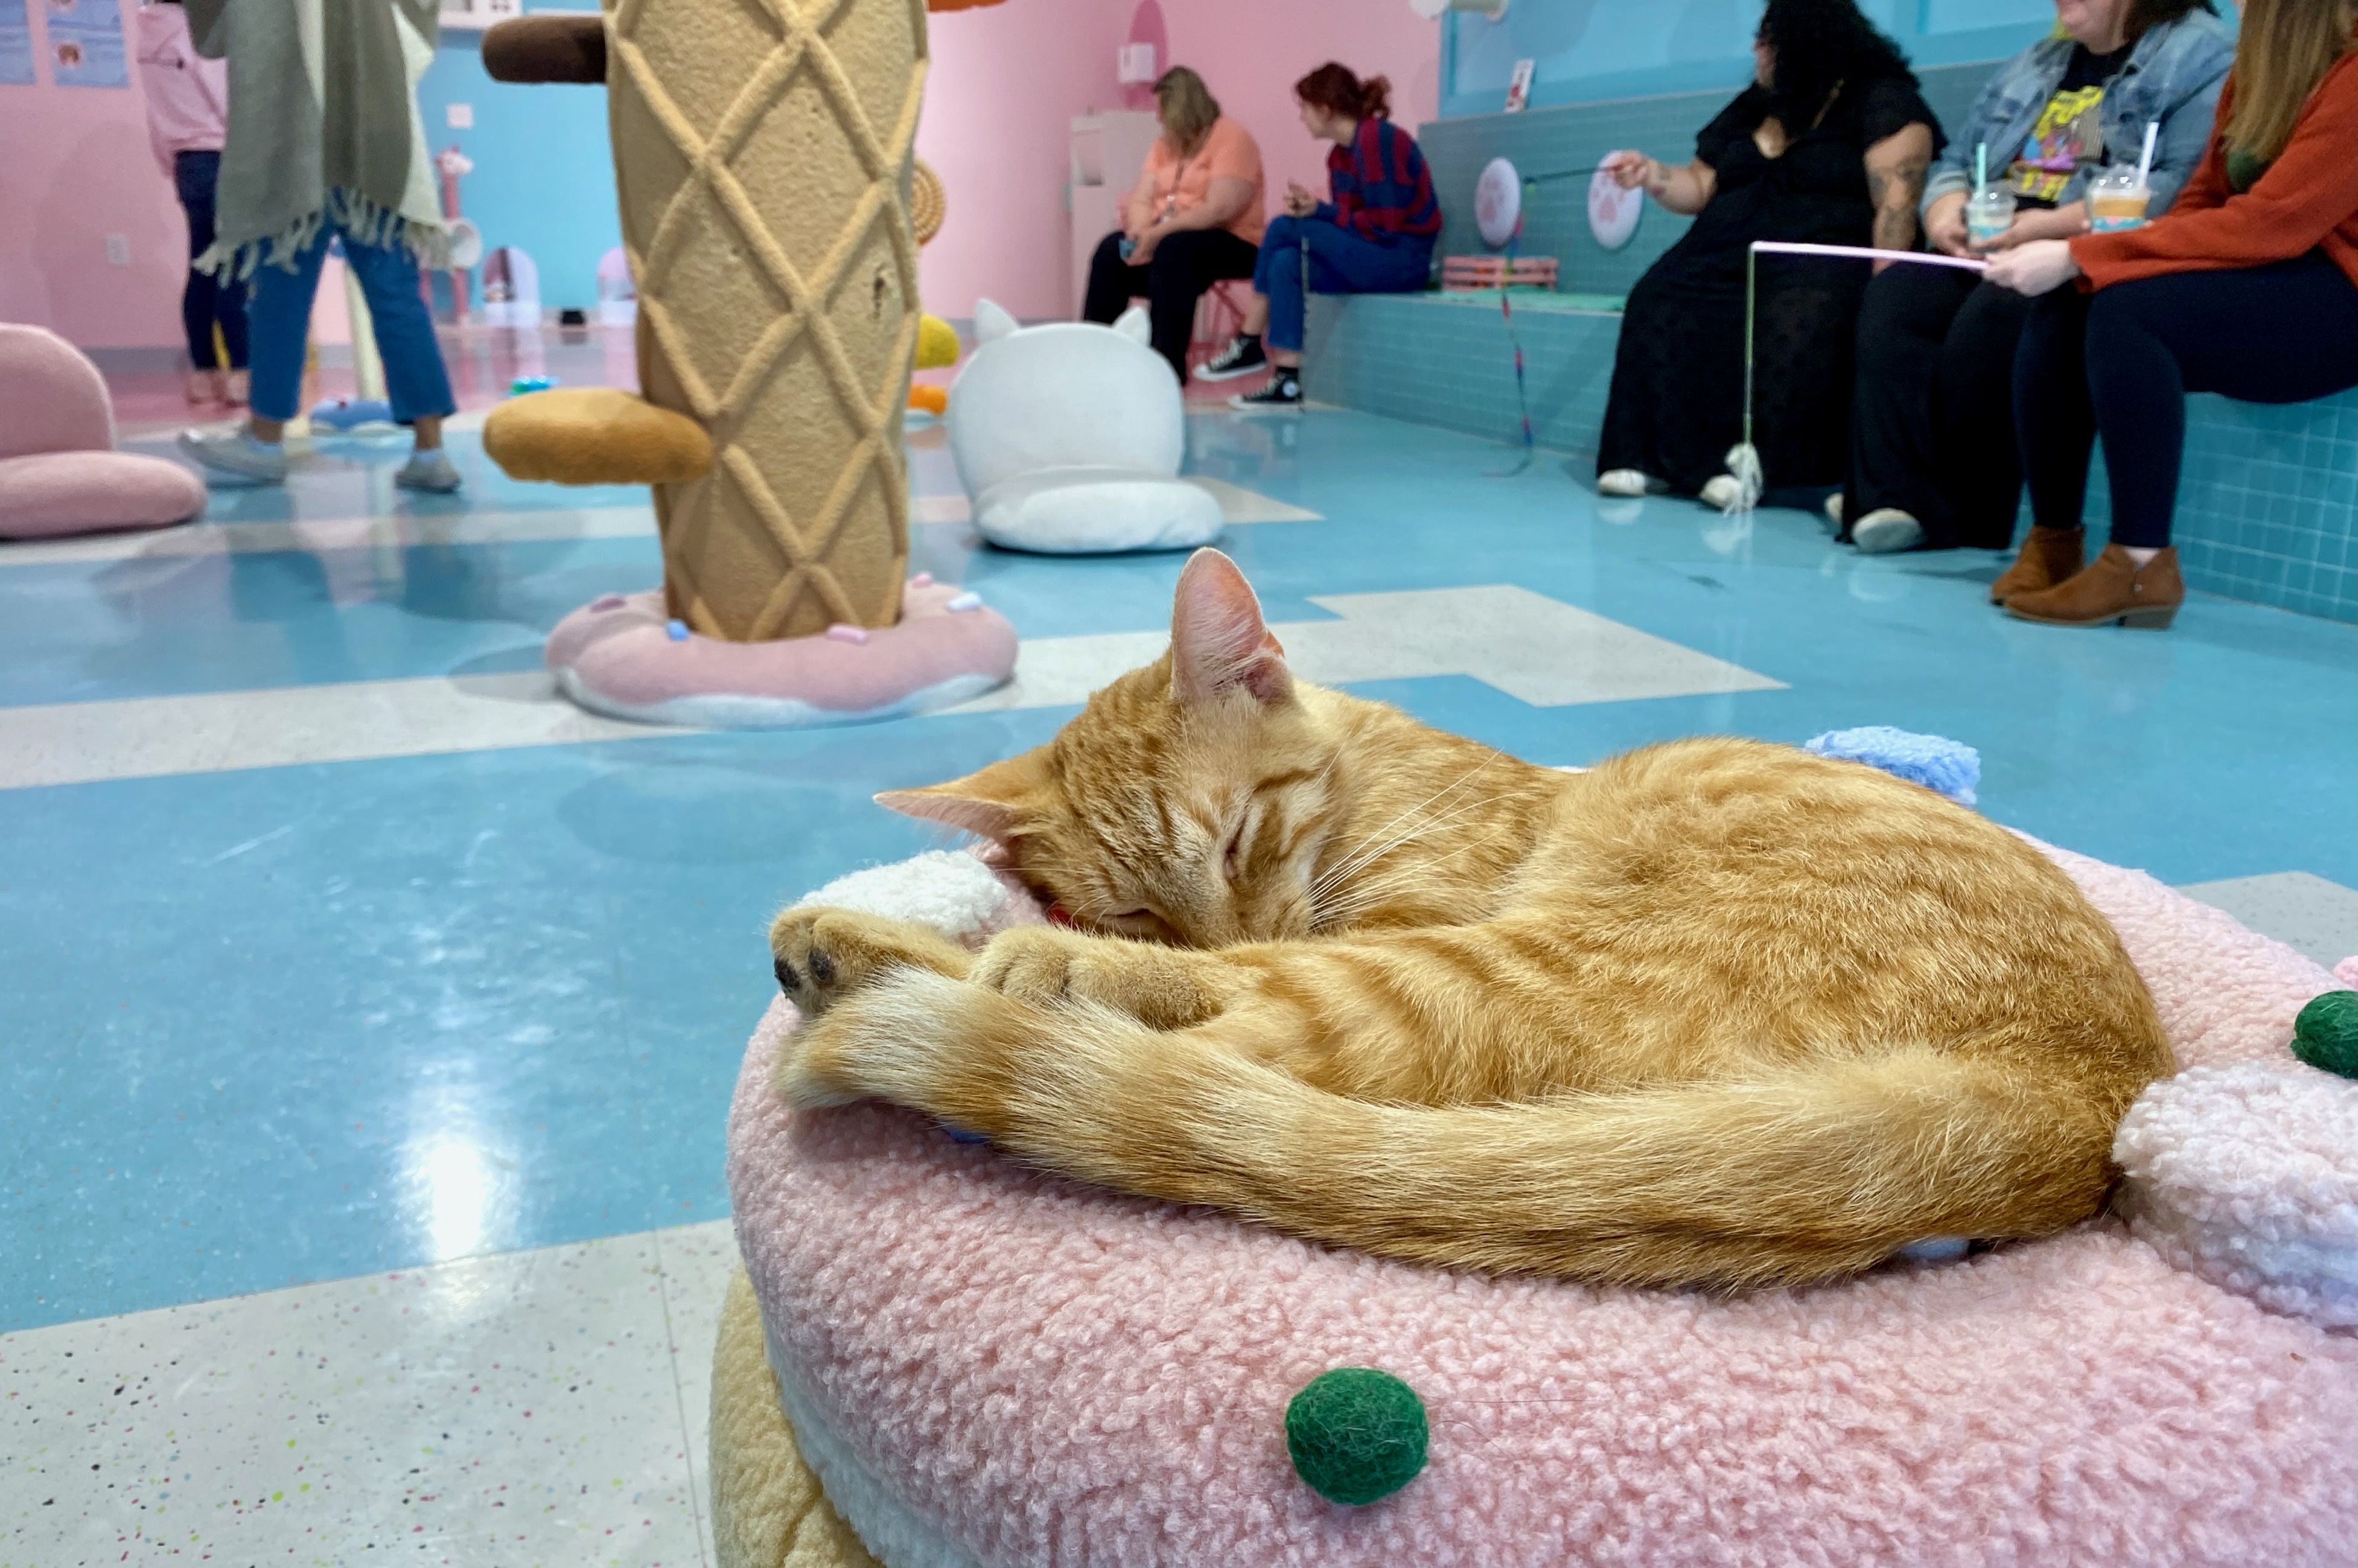 An orange cat curled up sleeping on a donut-shaped cushion